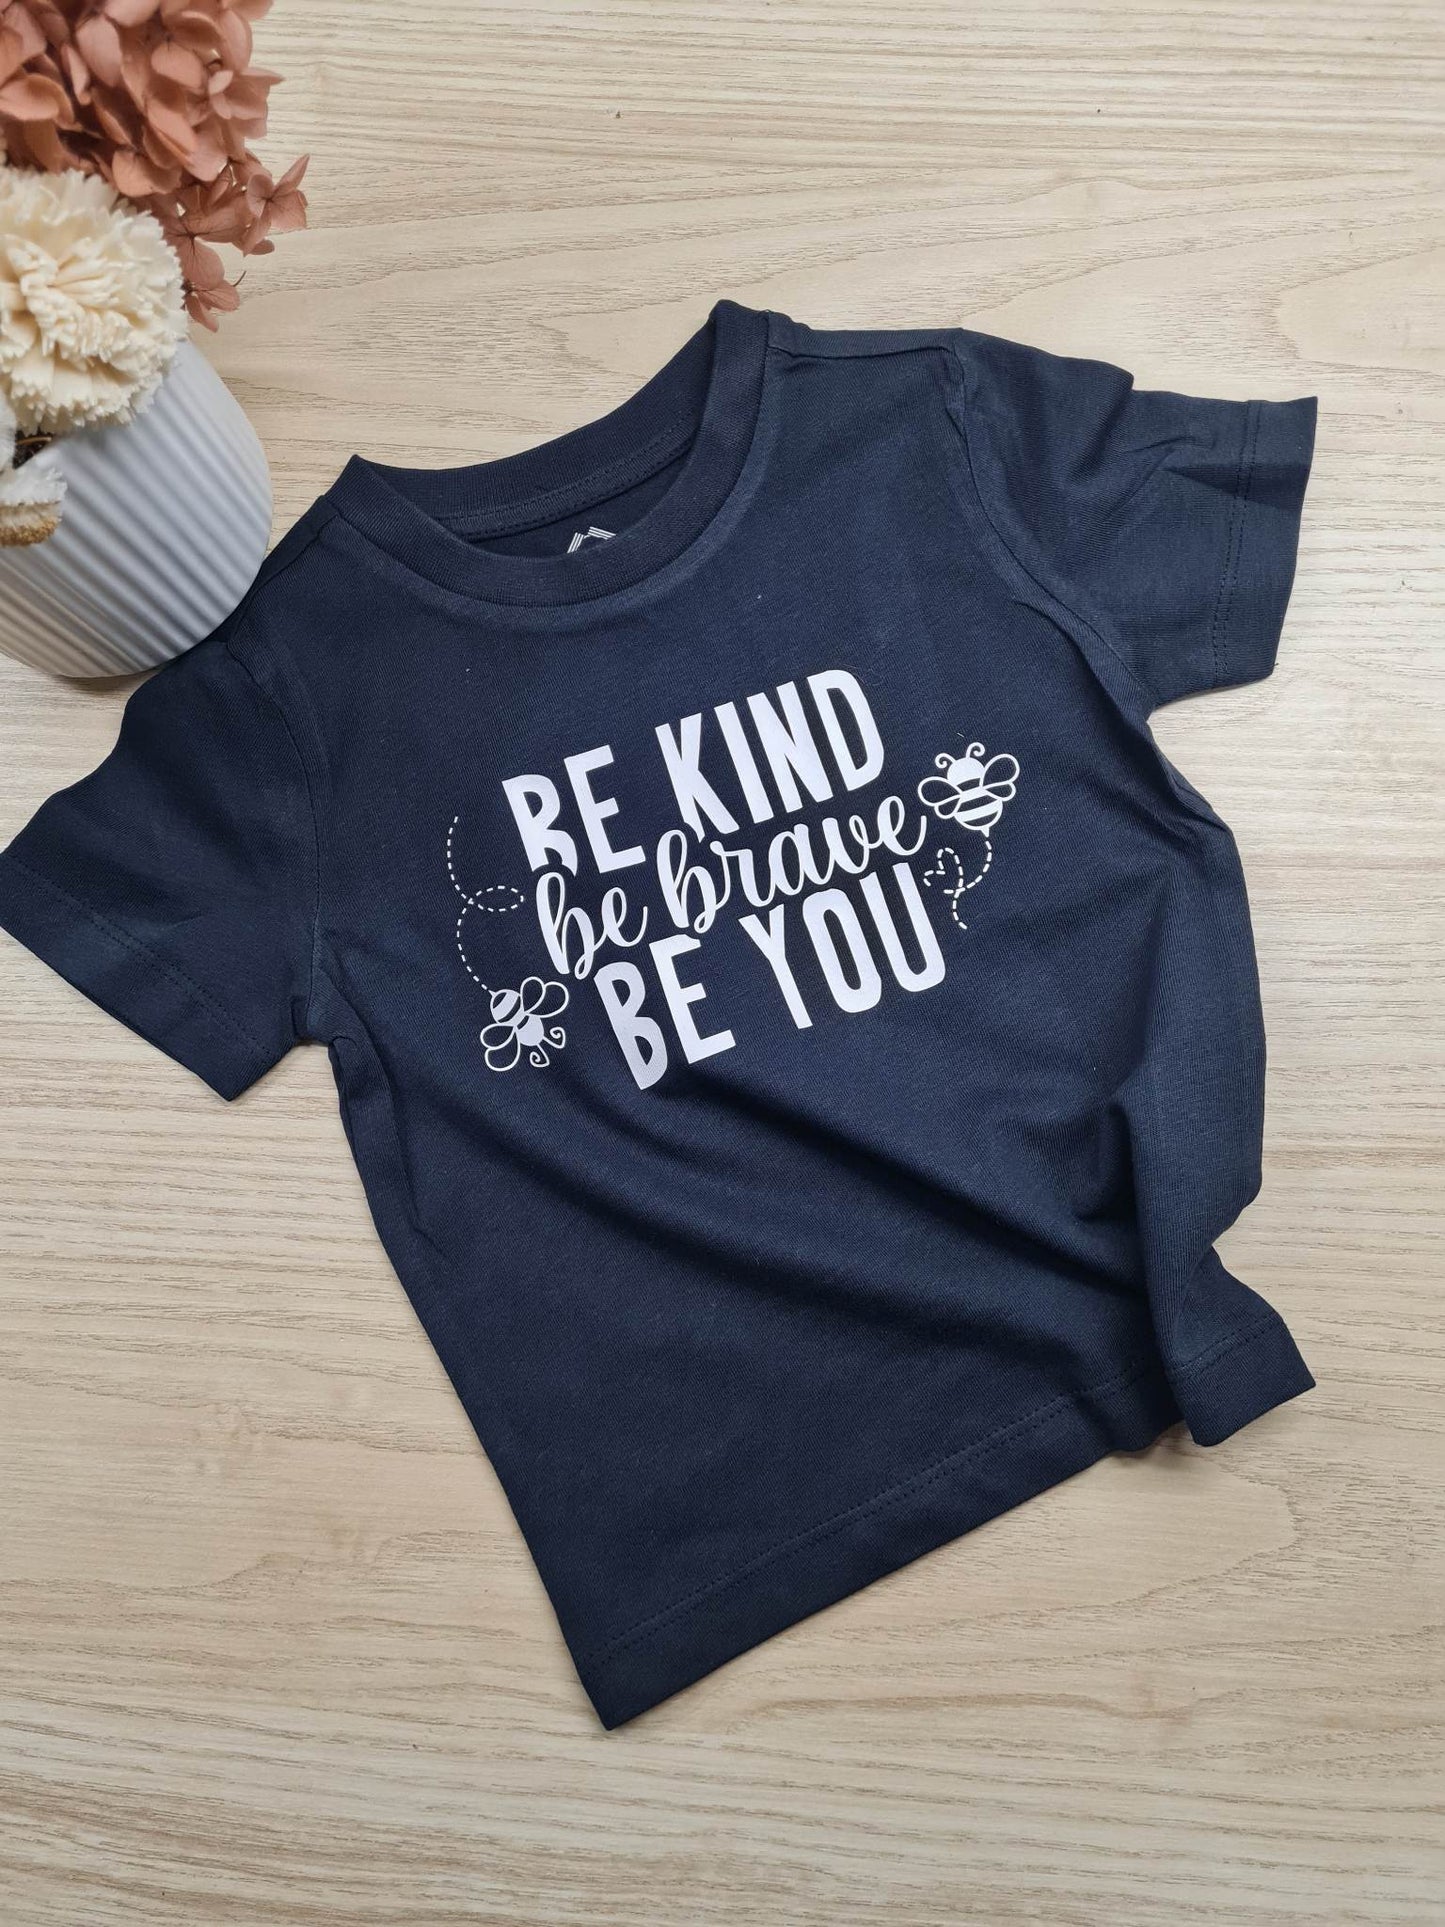 Kids Harmony Day Shirt - Be Kind Be Brave Be You